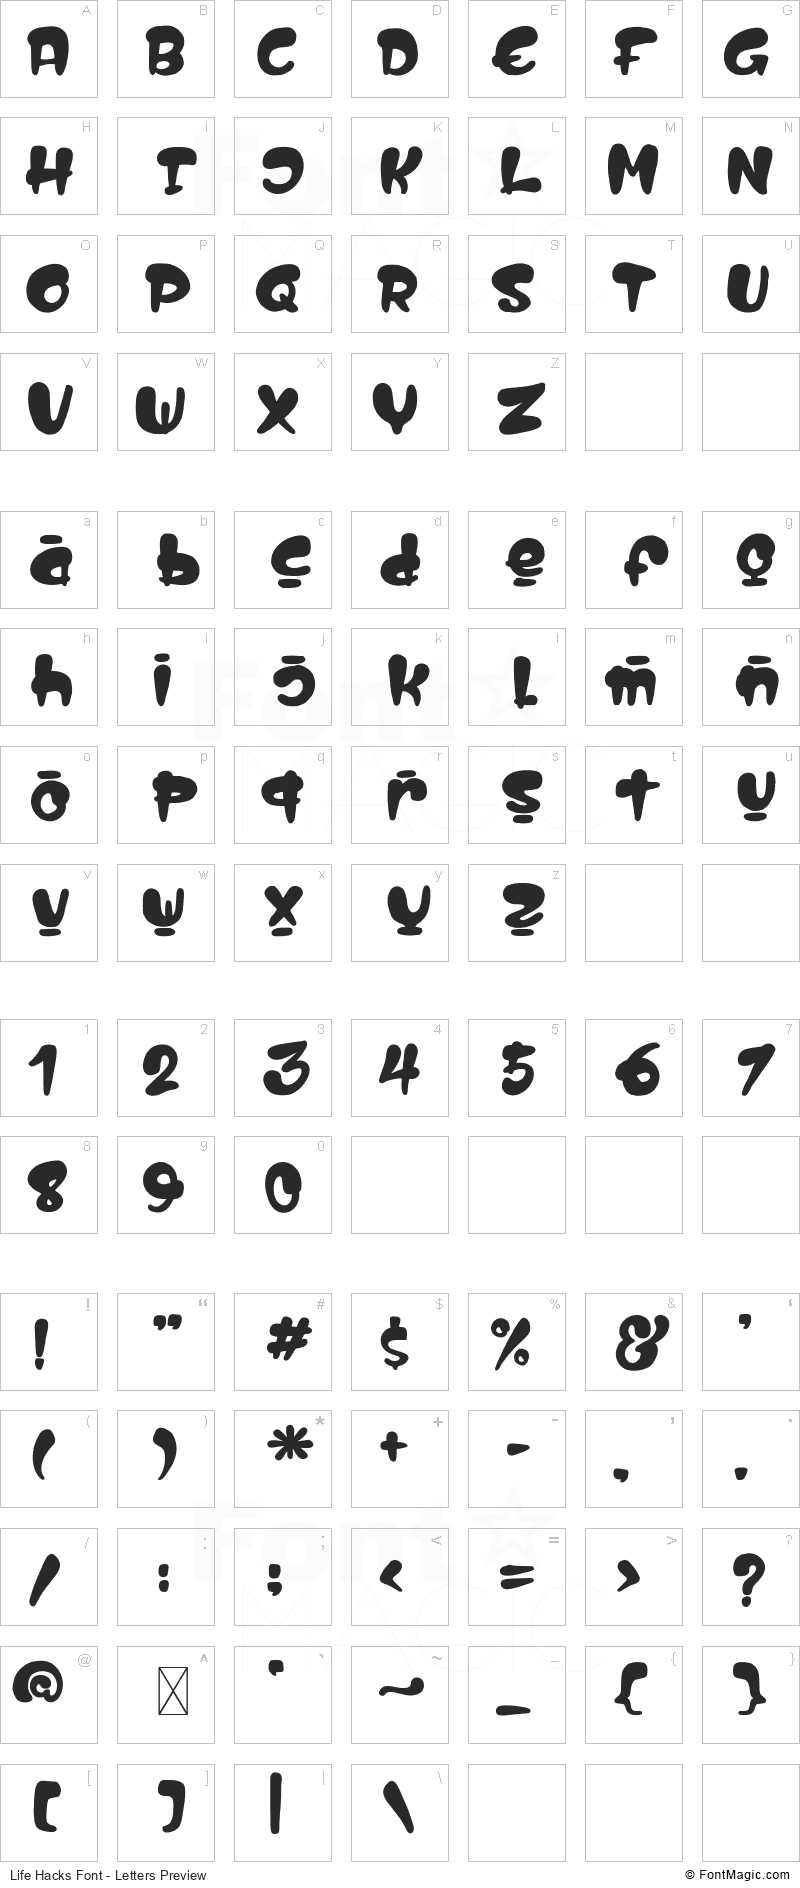 Life Hacks Font - All Latters Preview Chart